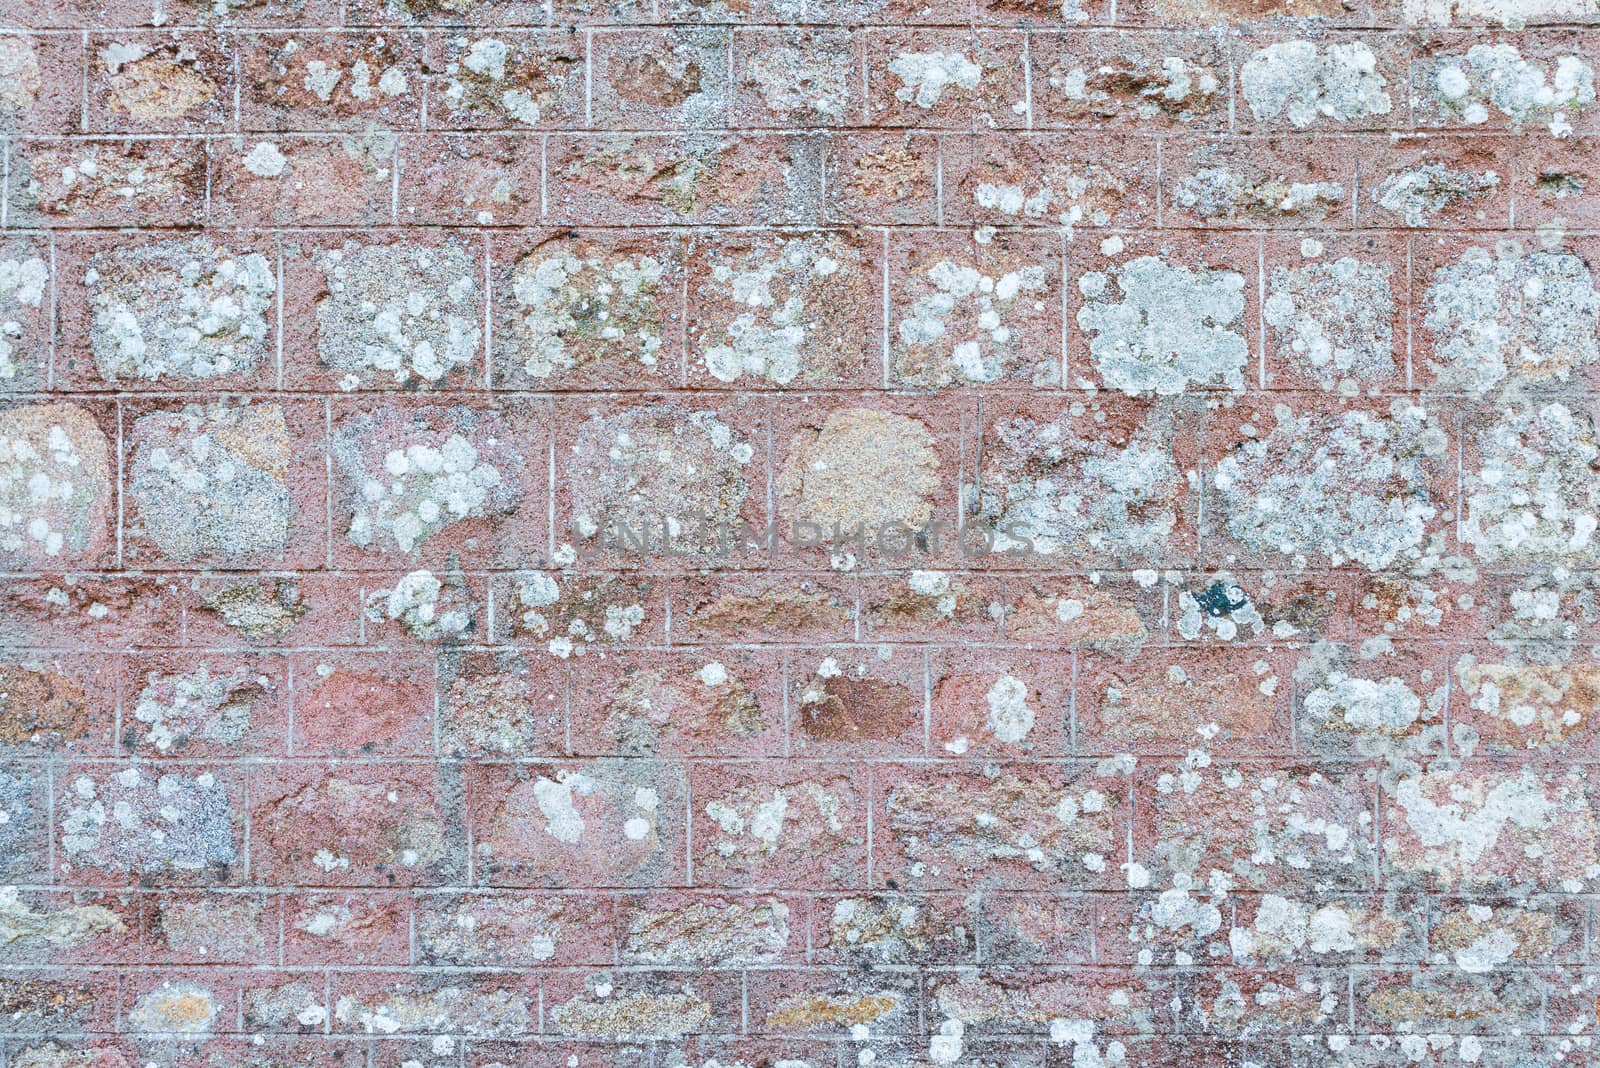 Old wall texture with lichen growing on its surface